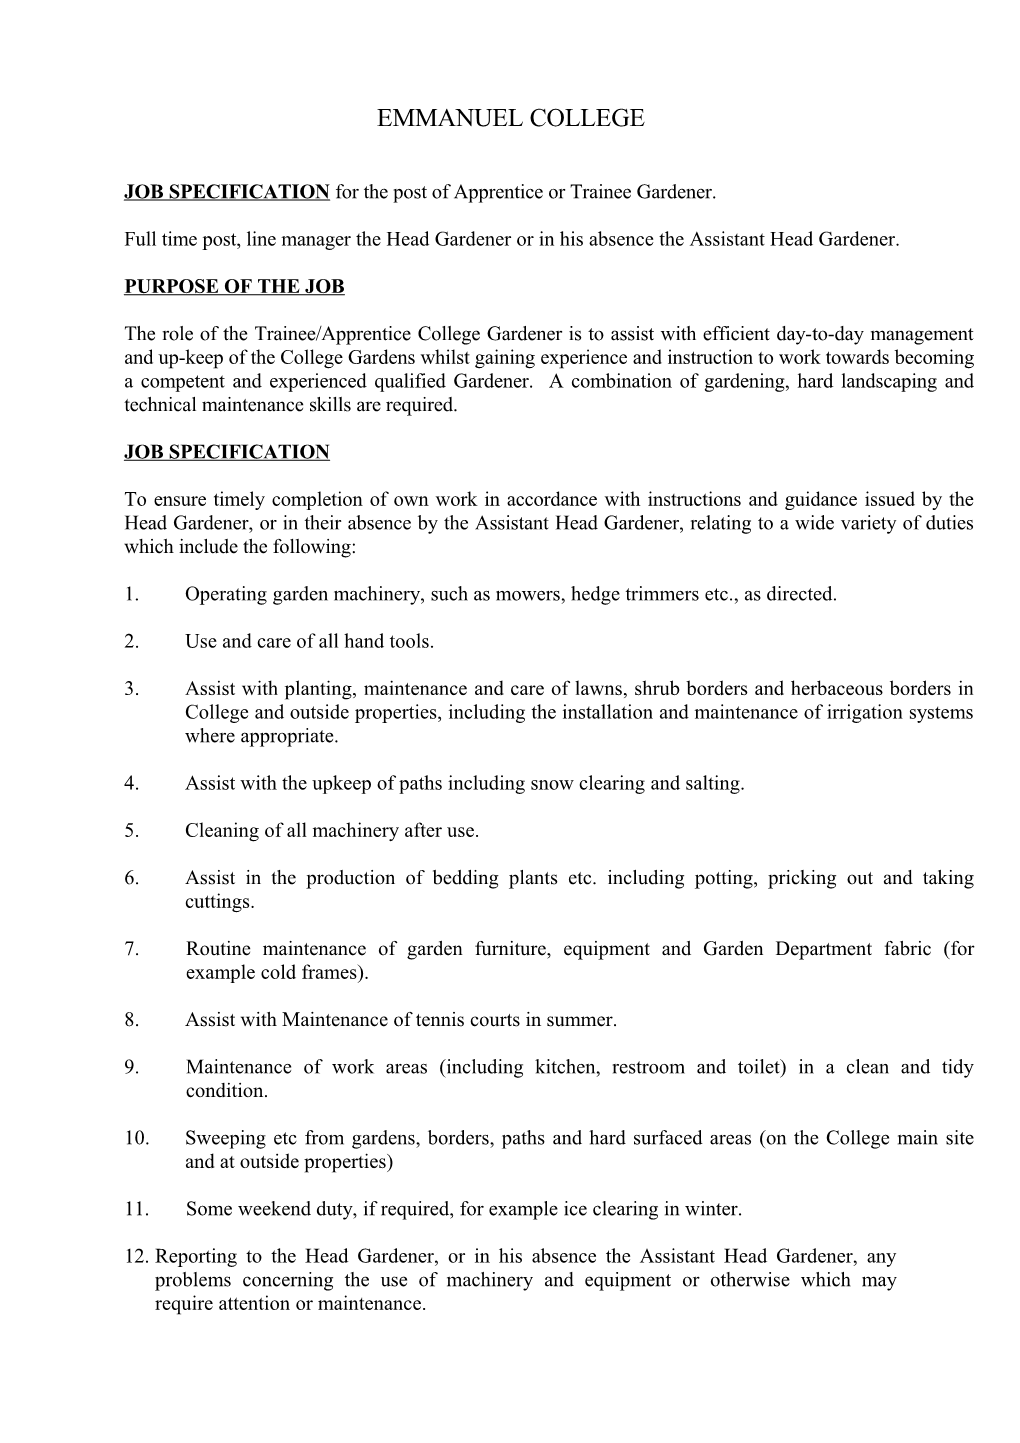 JOB SPECIFICATION for the Post of Apprentice Or Trainee Gardener